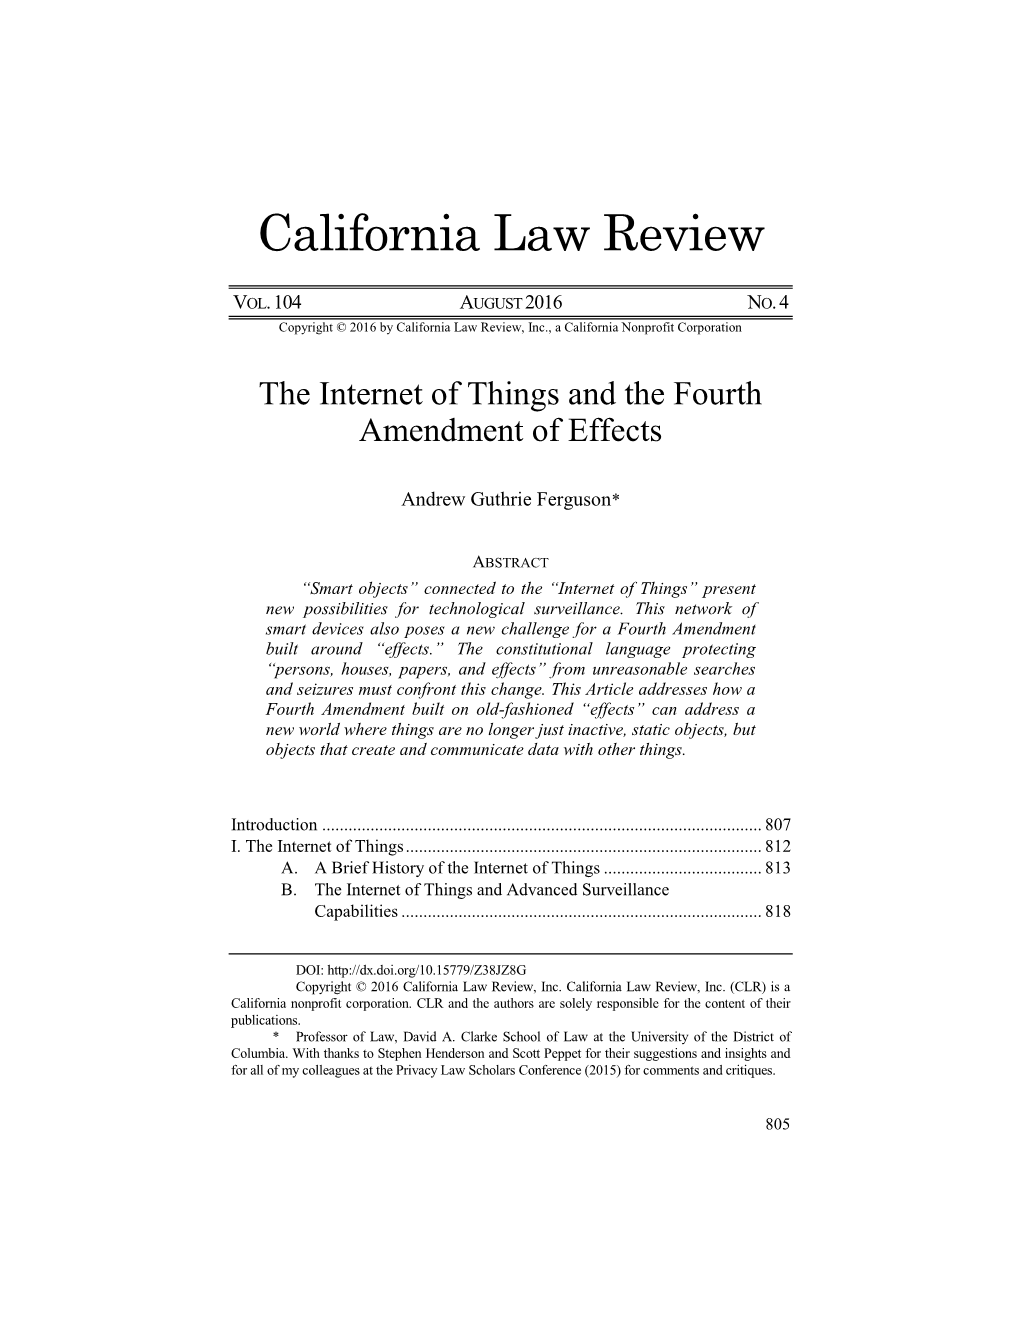 The Internet of Things and the Fourth Amendment of Effects